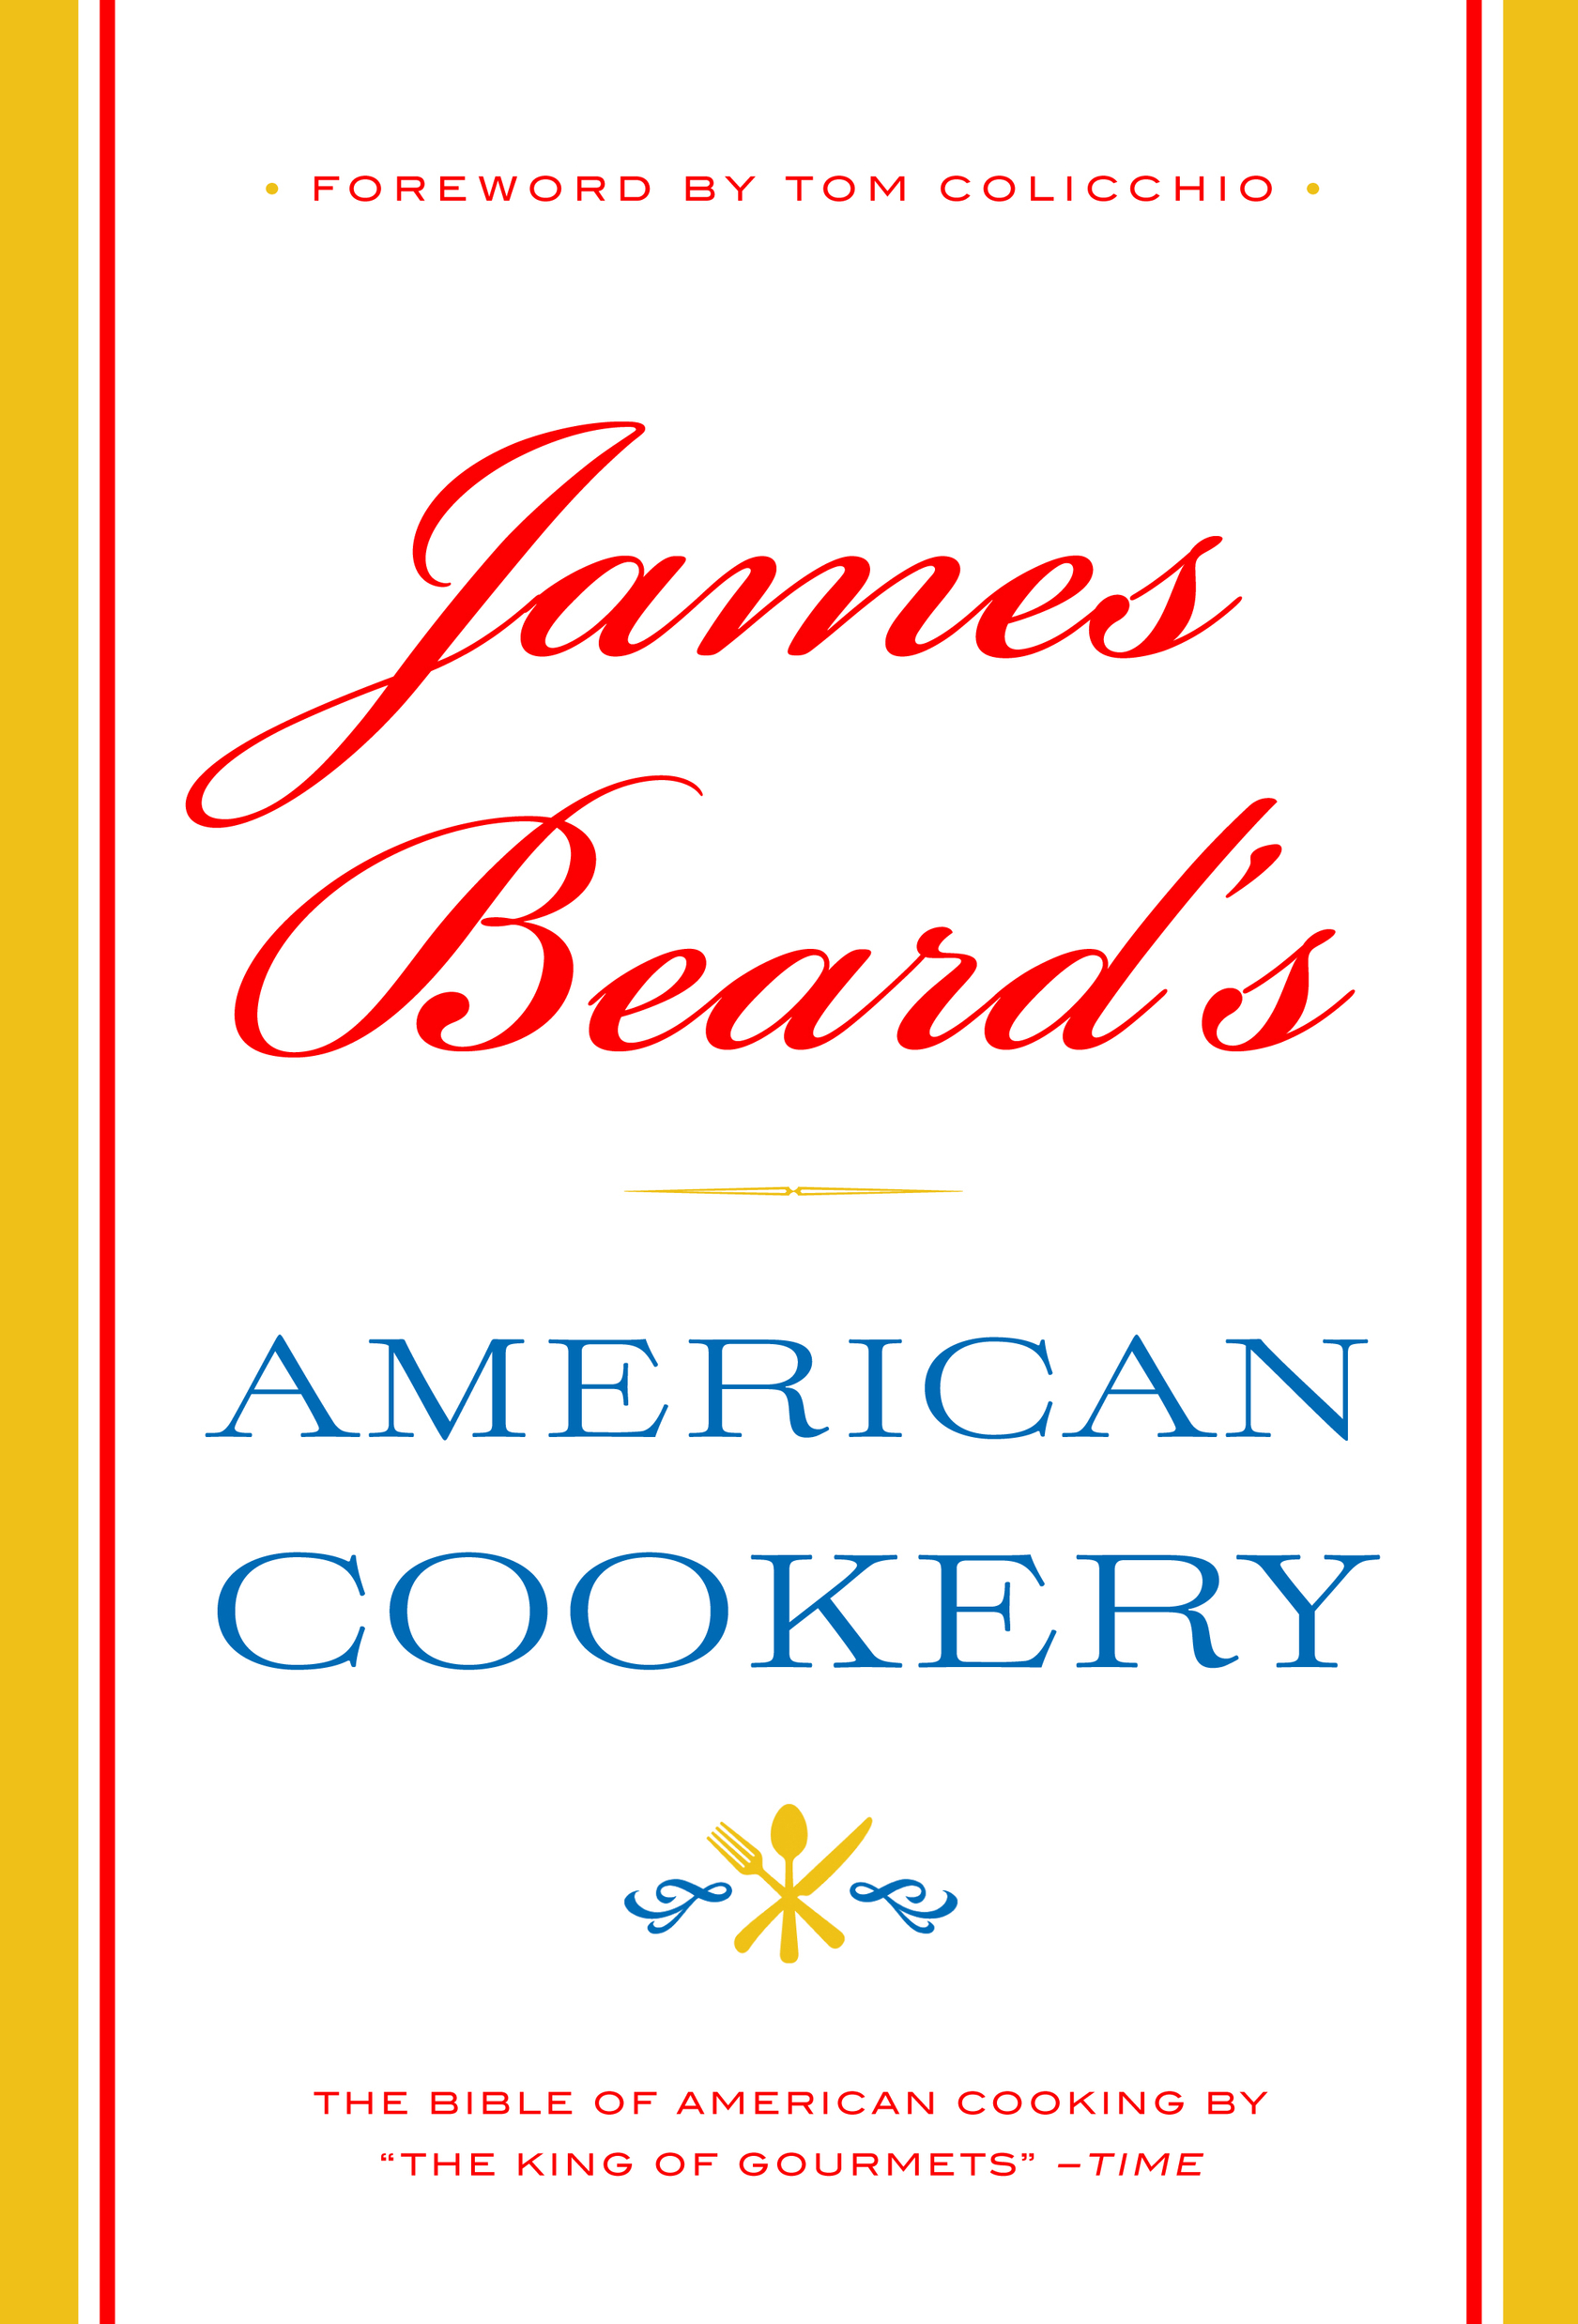 James Beard’s American Cookery {Cookbook Review} Wholistic Woman